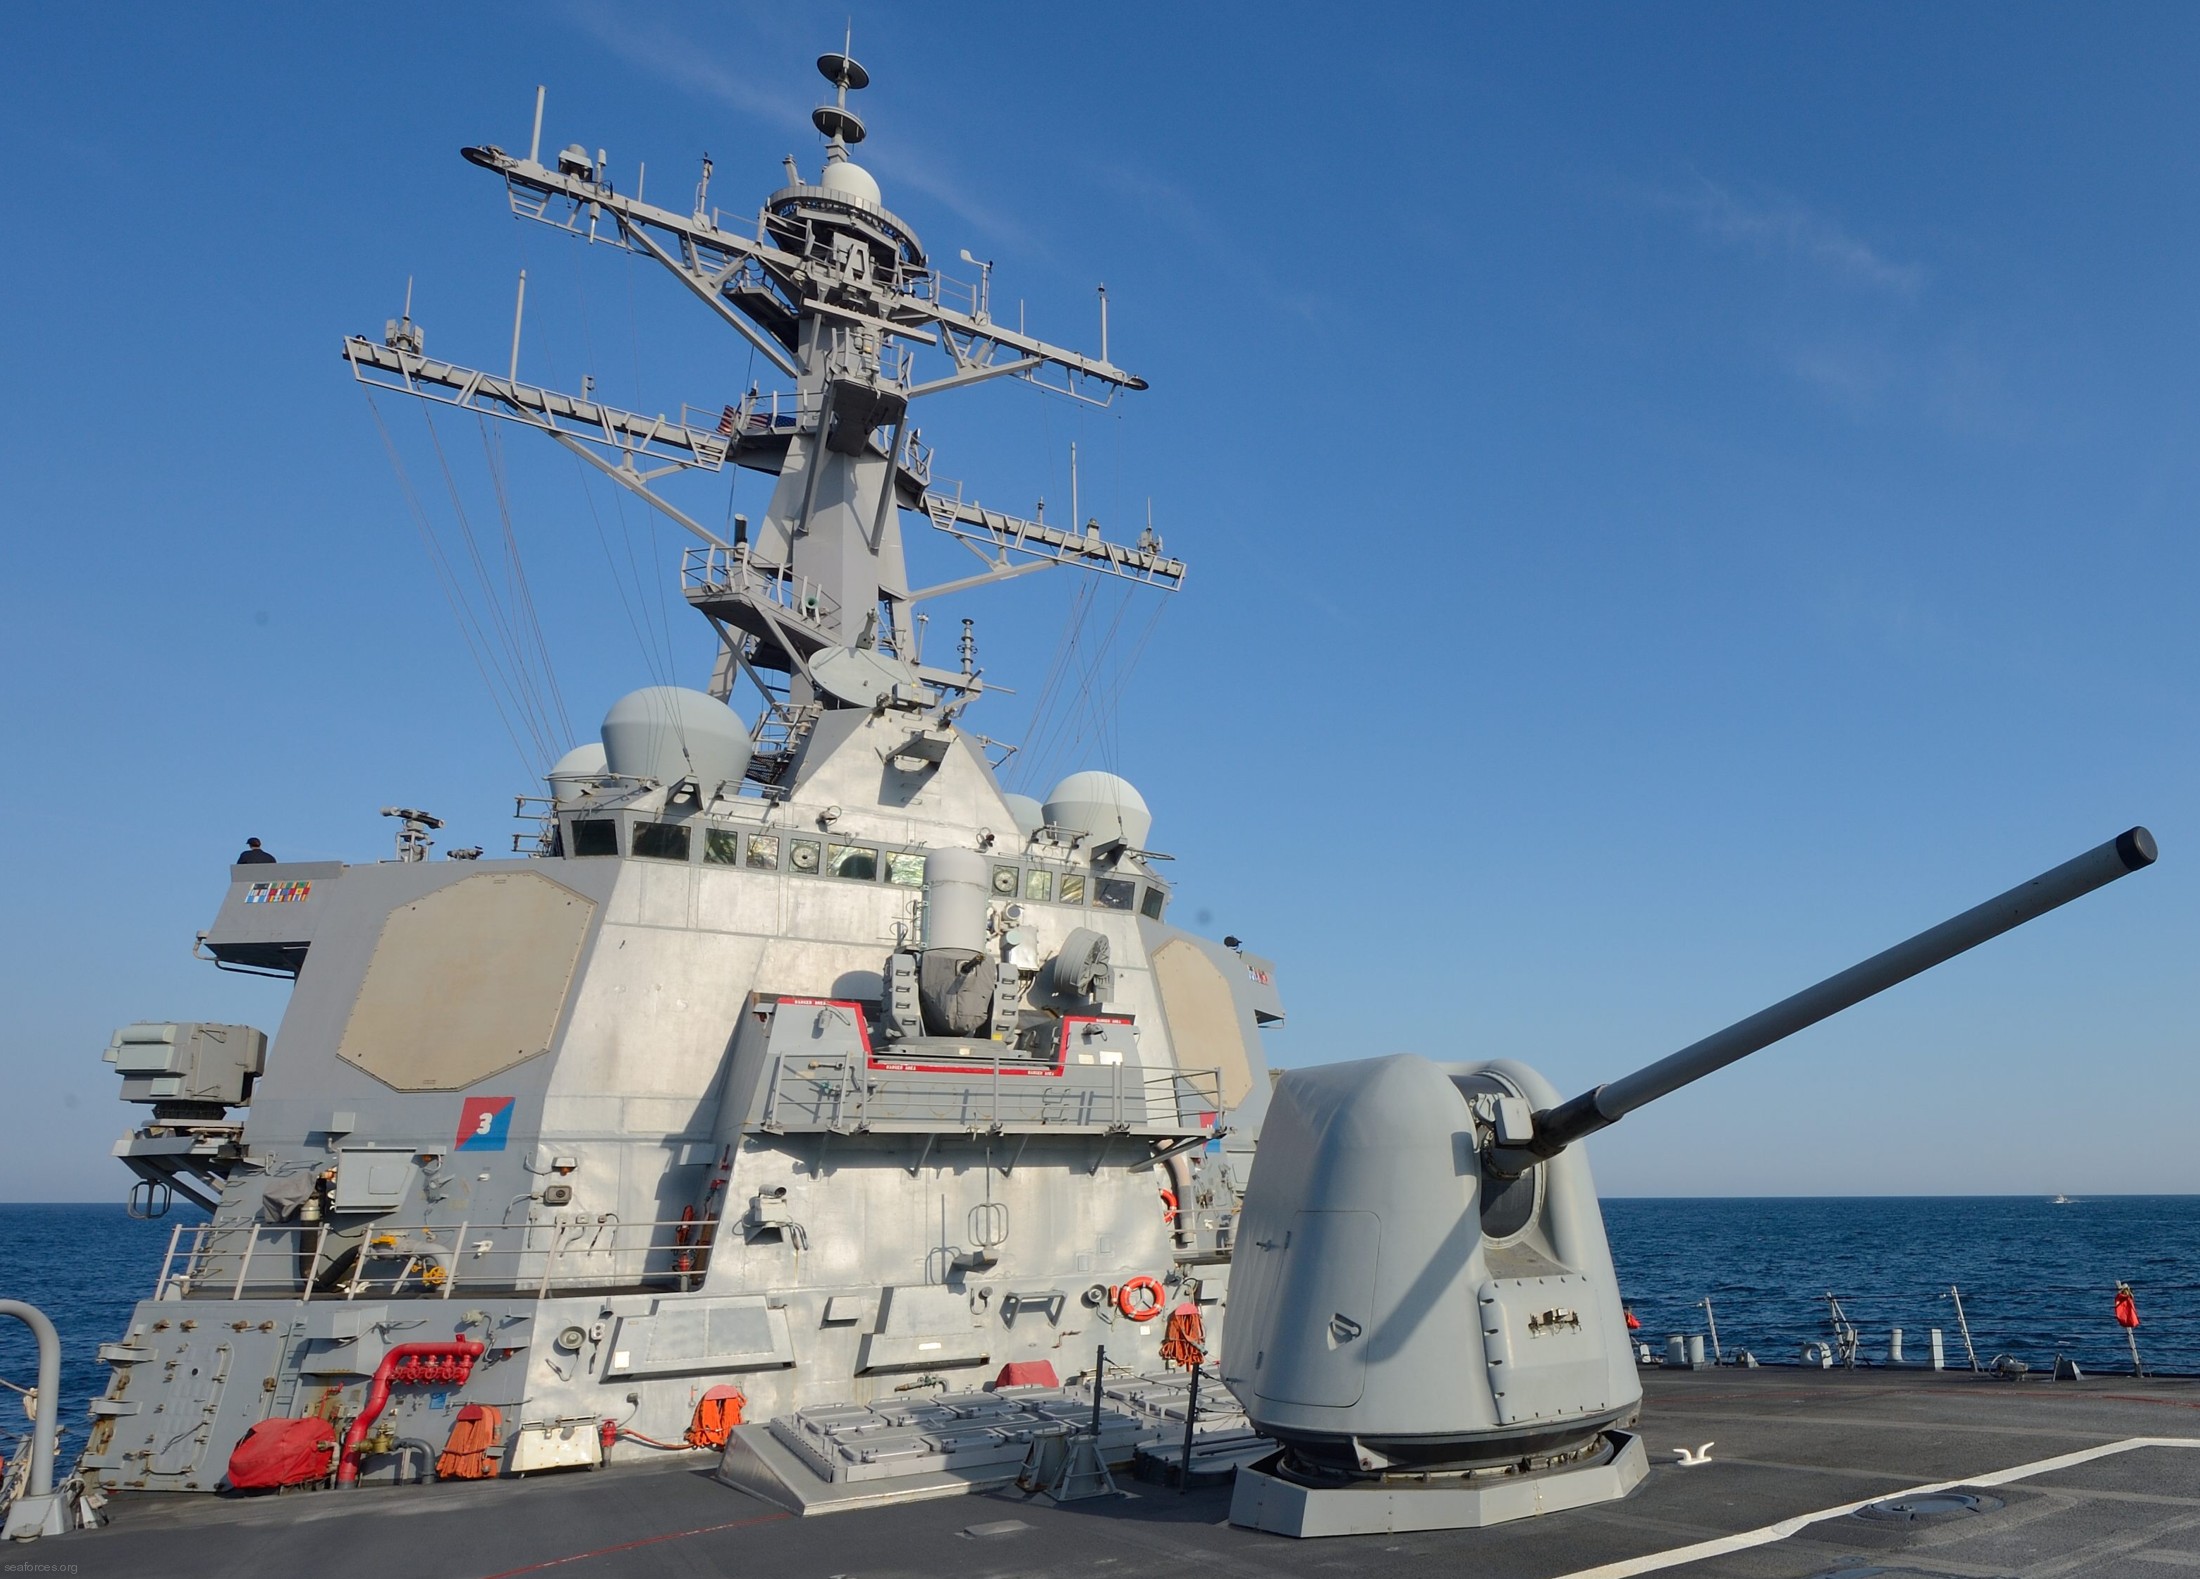 ddg-71 uss ross guided missile destroyer arleigh burke class aegis bmd 105 black sea